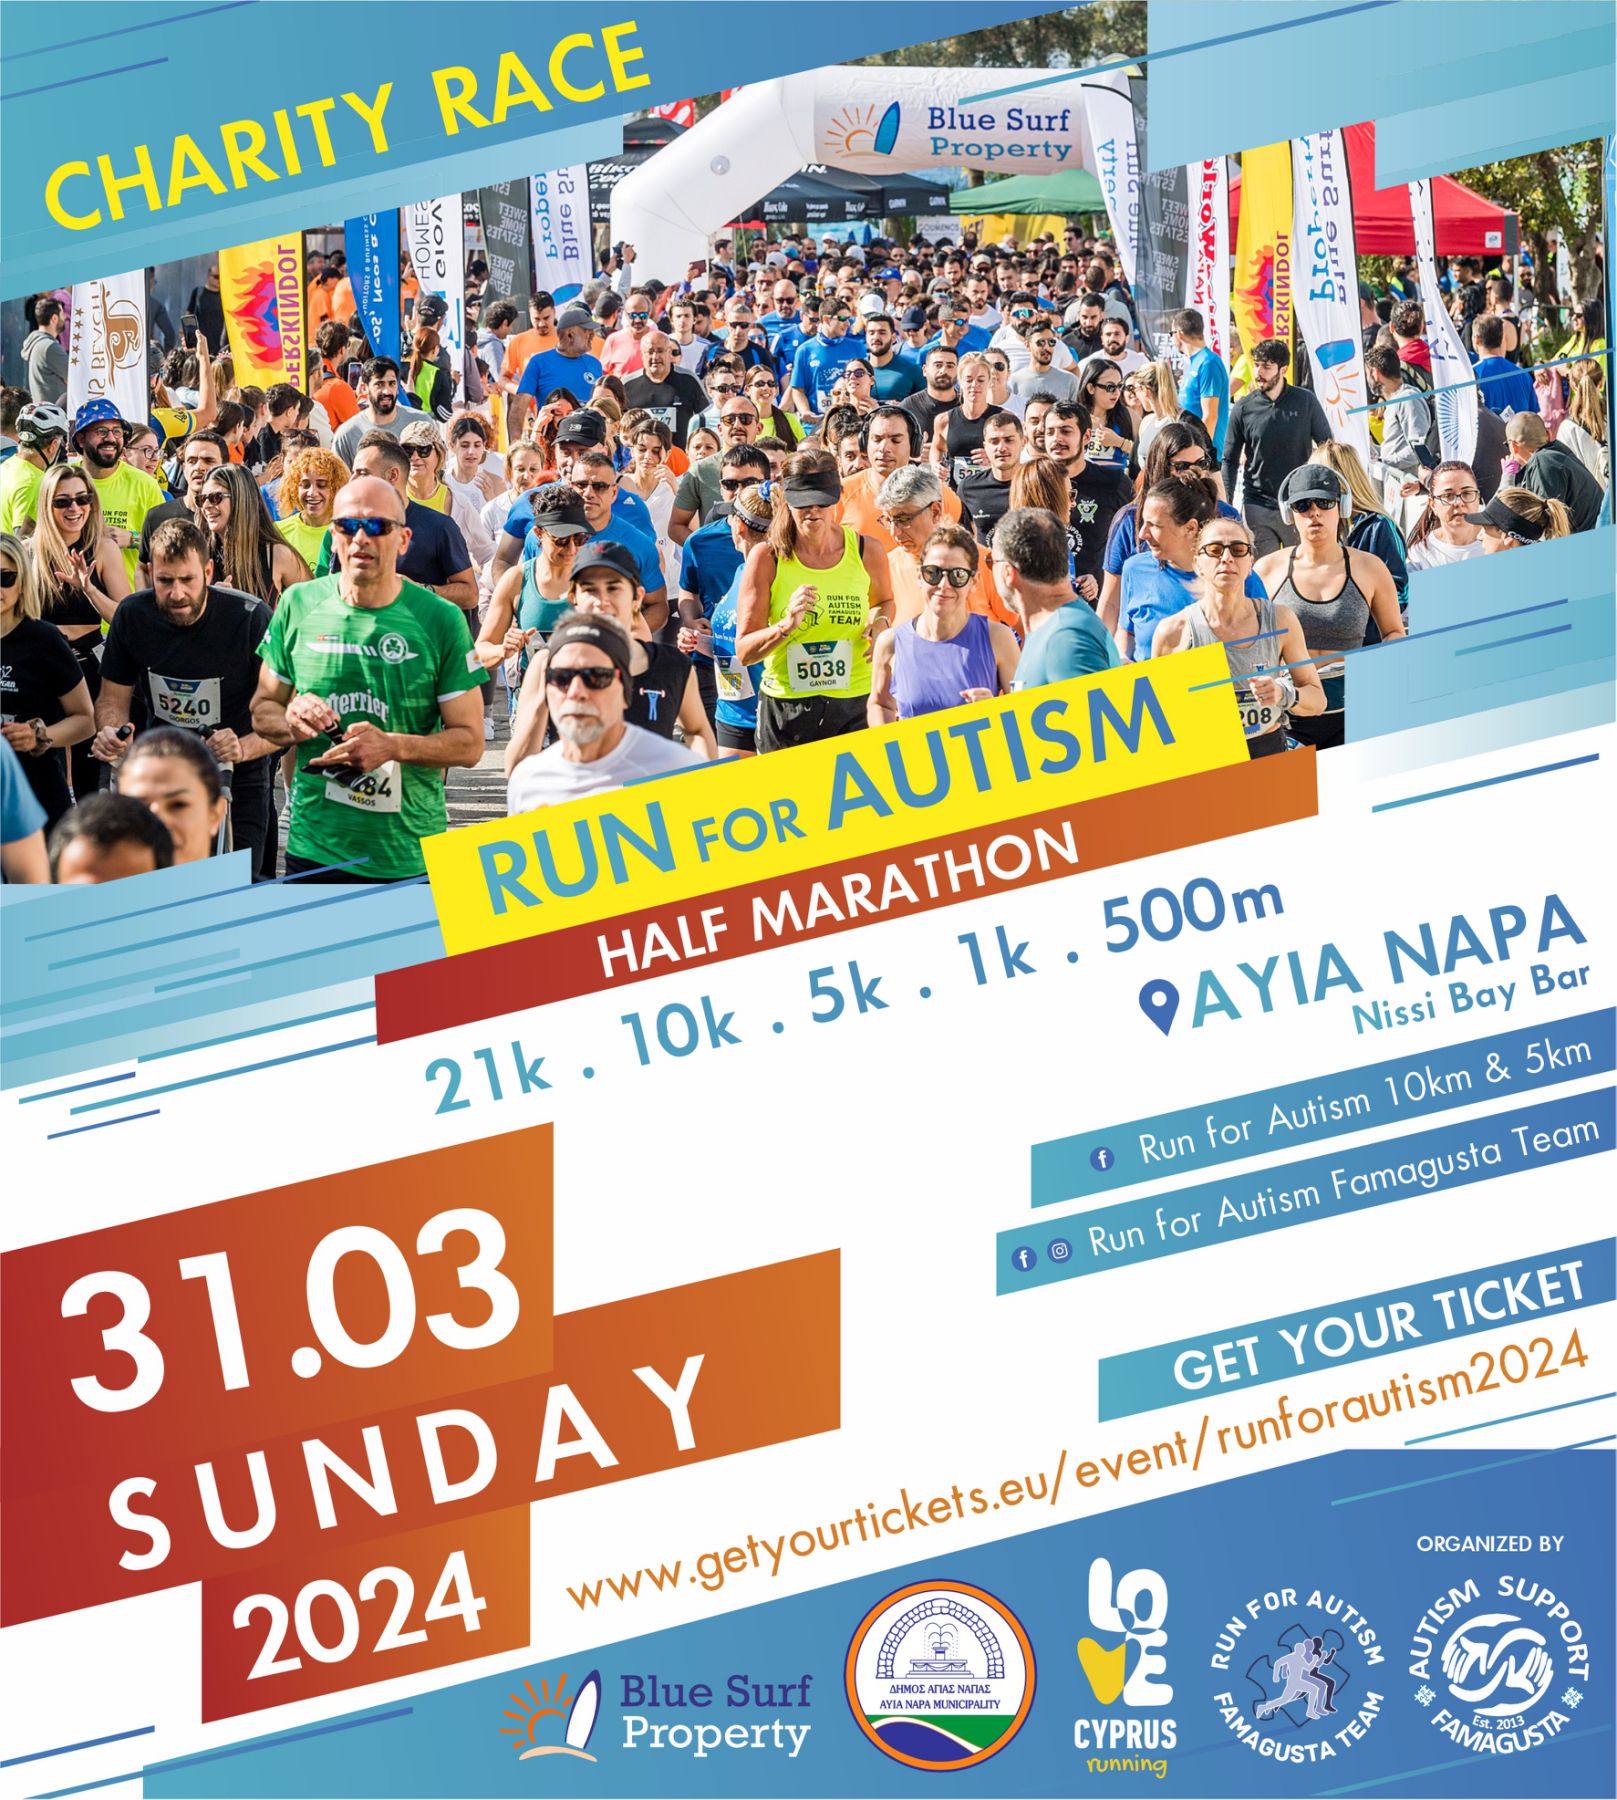 374216788 302853859009308 8707788986059055888 n 3rd Run for Autism, exclusive, AGIA NAPA